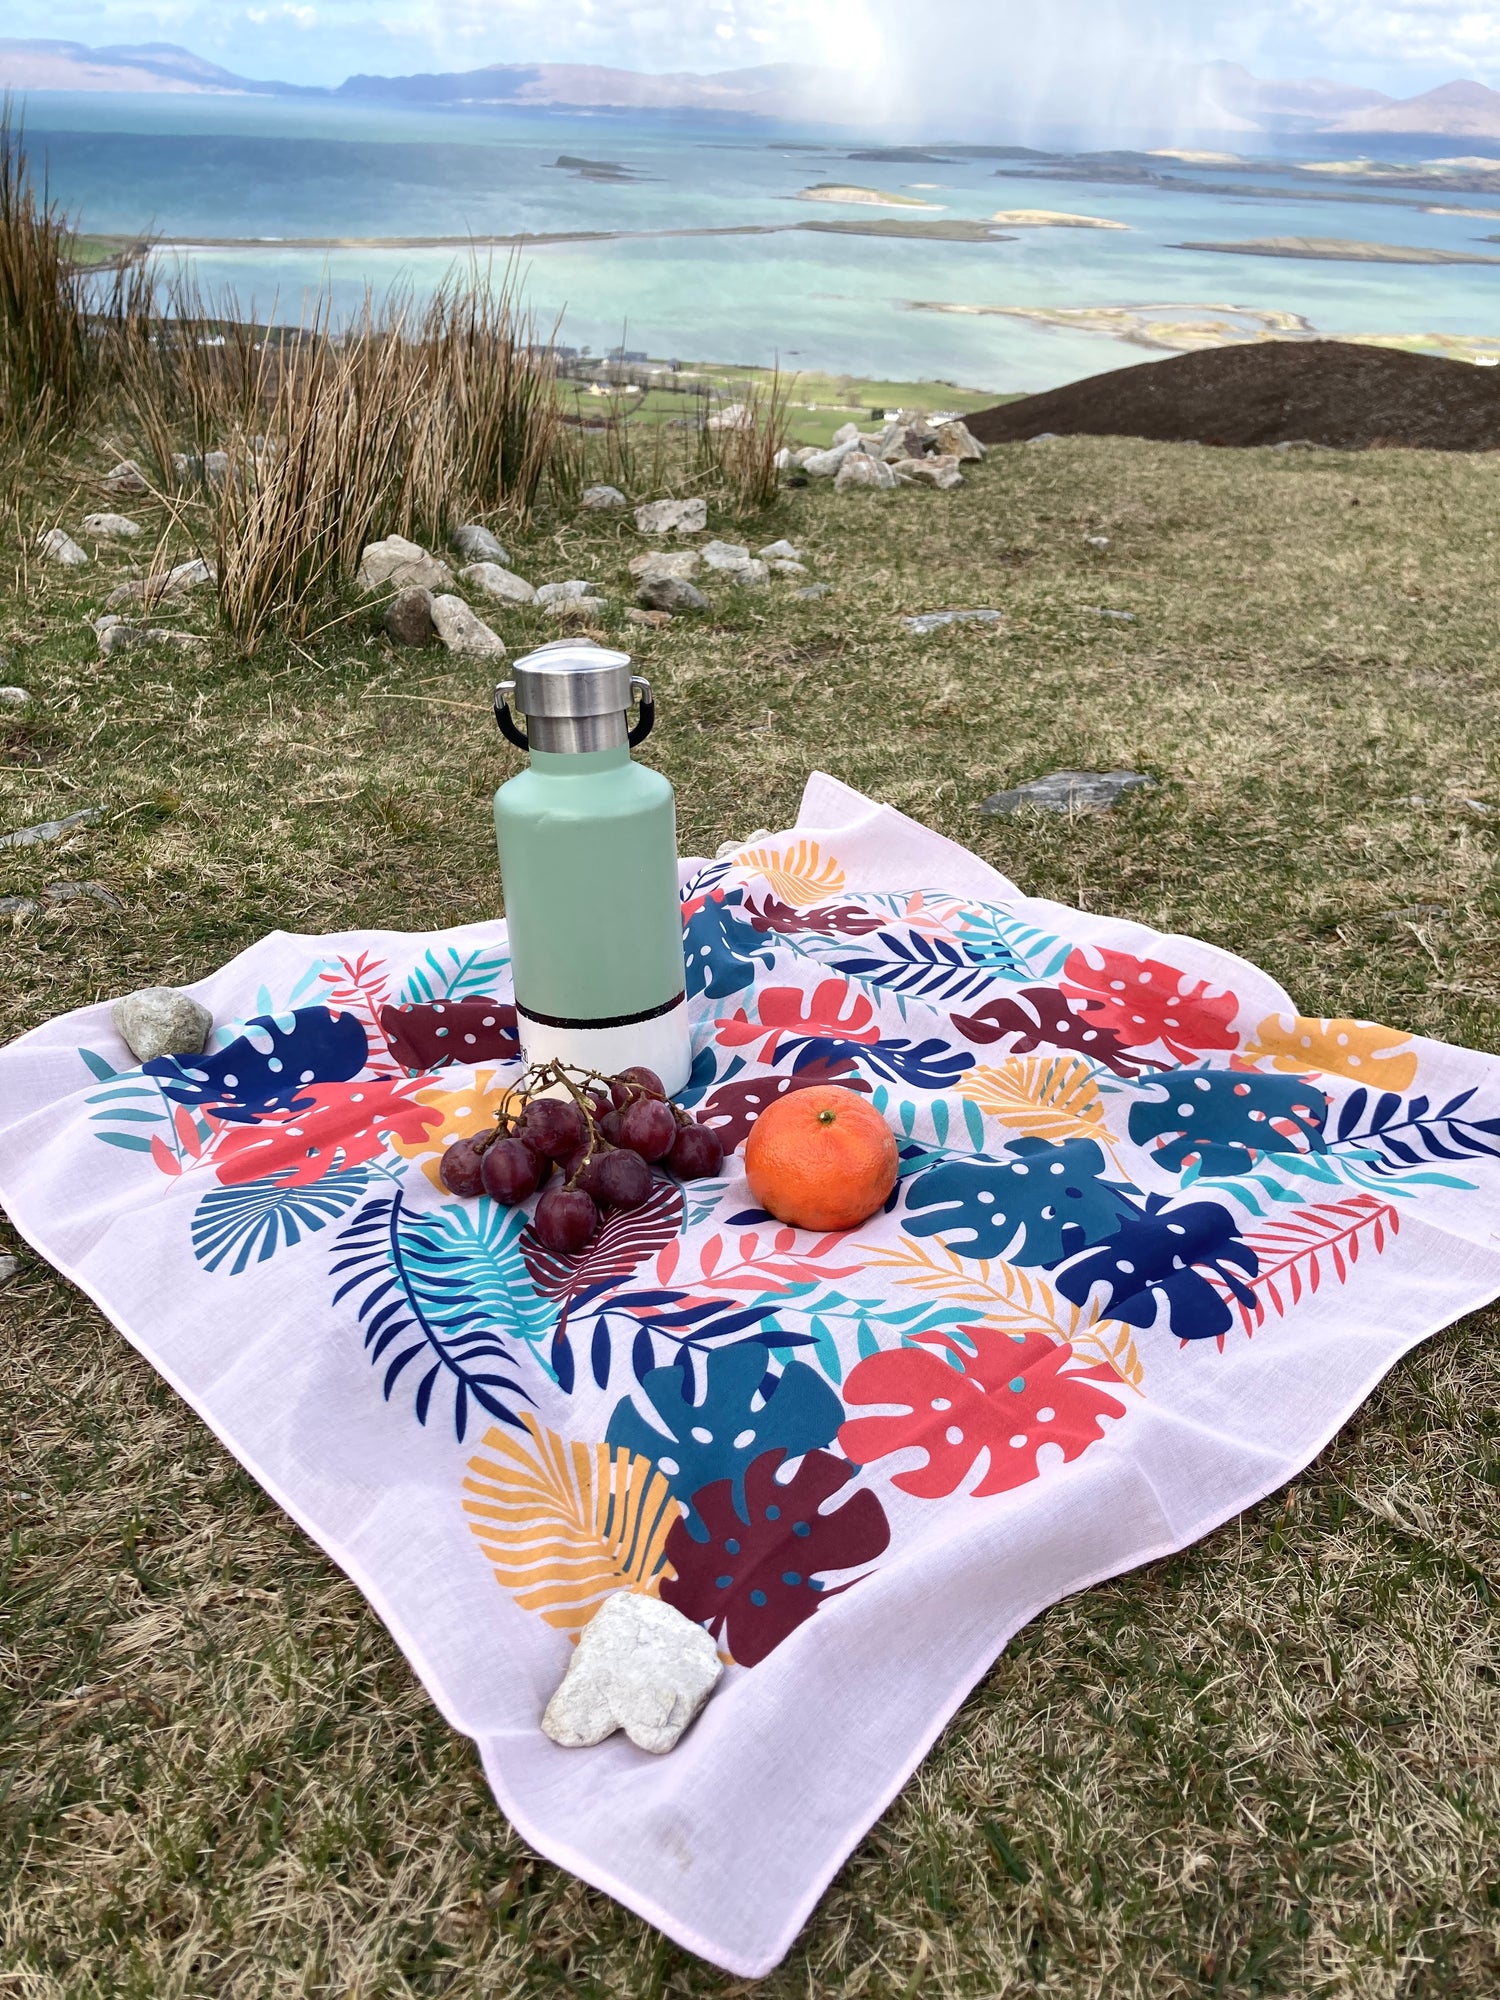 Furoshiki wrap or scarf used as a mini picnic blanket, with a reusable water bottle. Sea and mountains in the distance